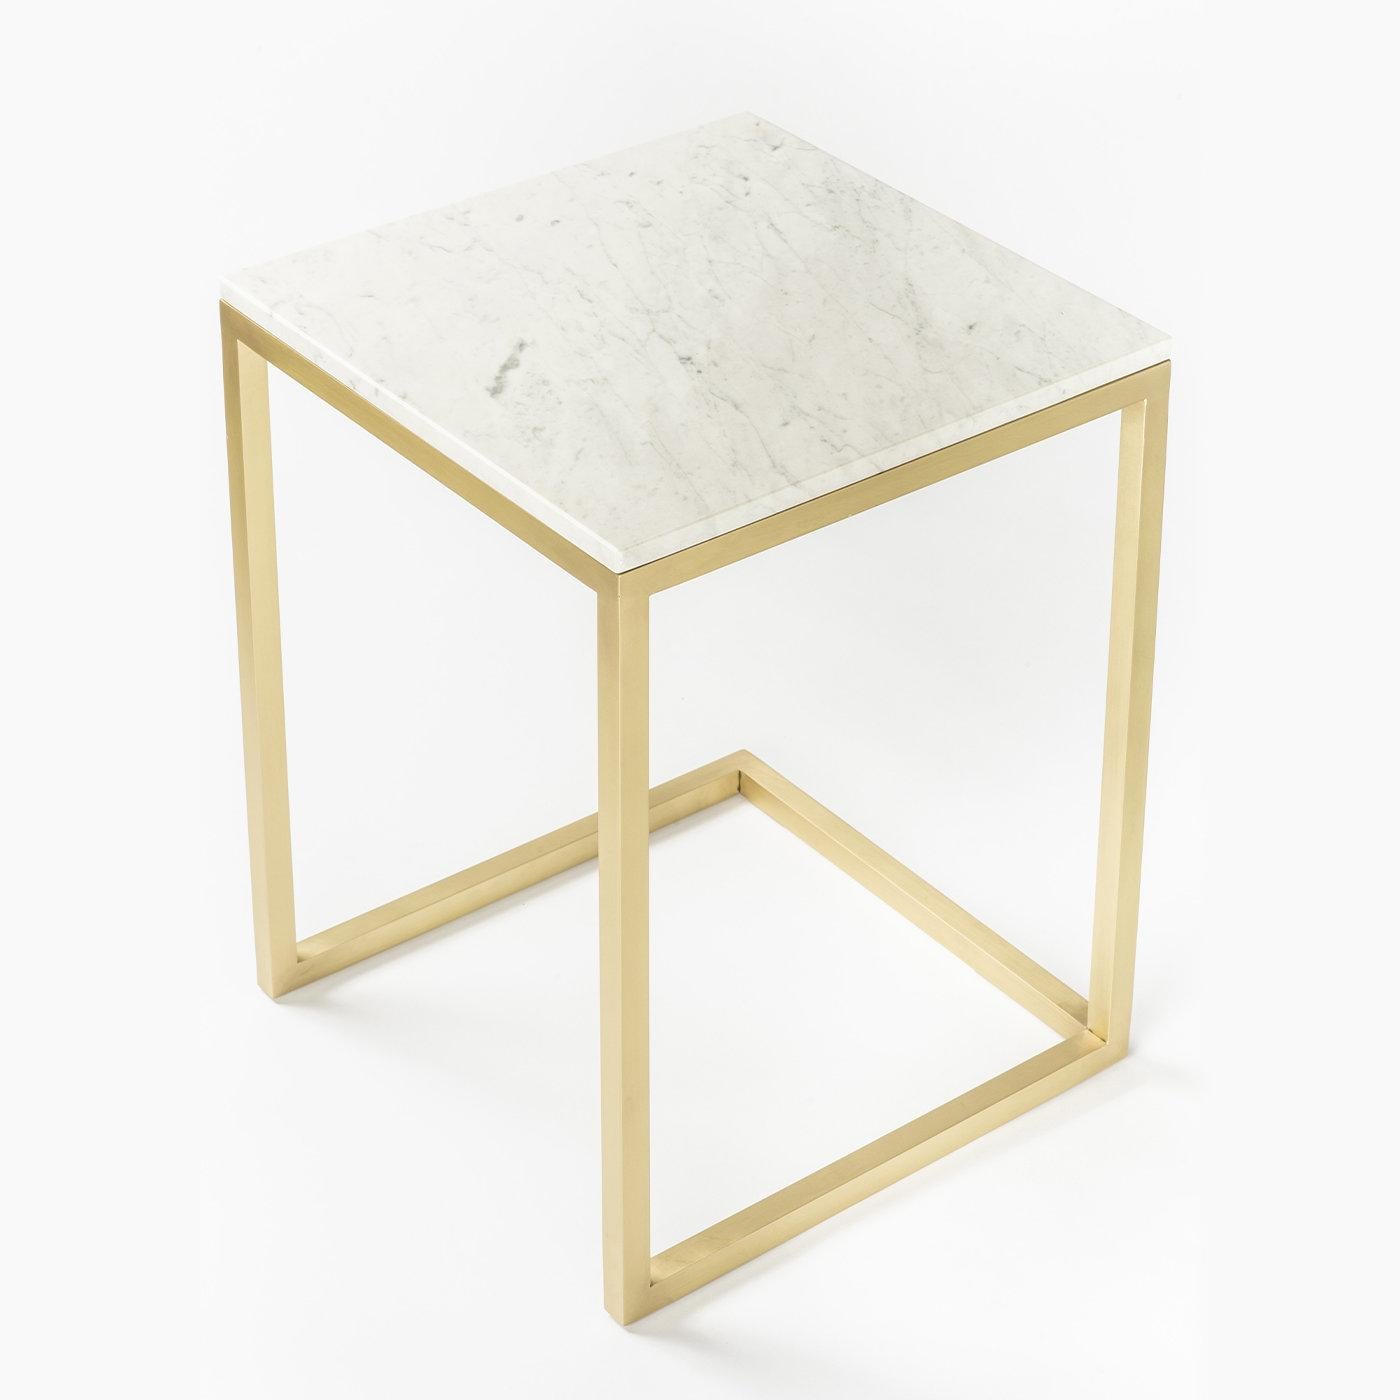 A visually balanced interplay of hues and geometric lines, this side table is a refined and opulent design by Antonio Saporito. Ideally complementing a contemporary decor but also suitable for a classic interior thanks to its combination of brass